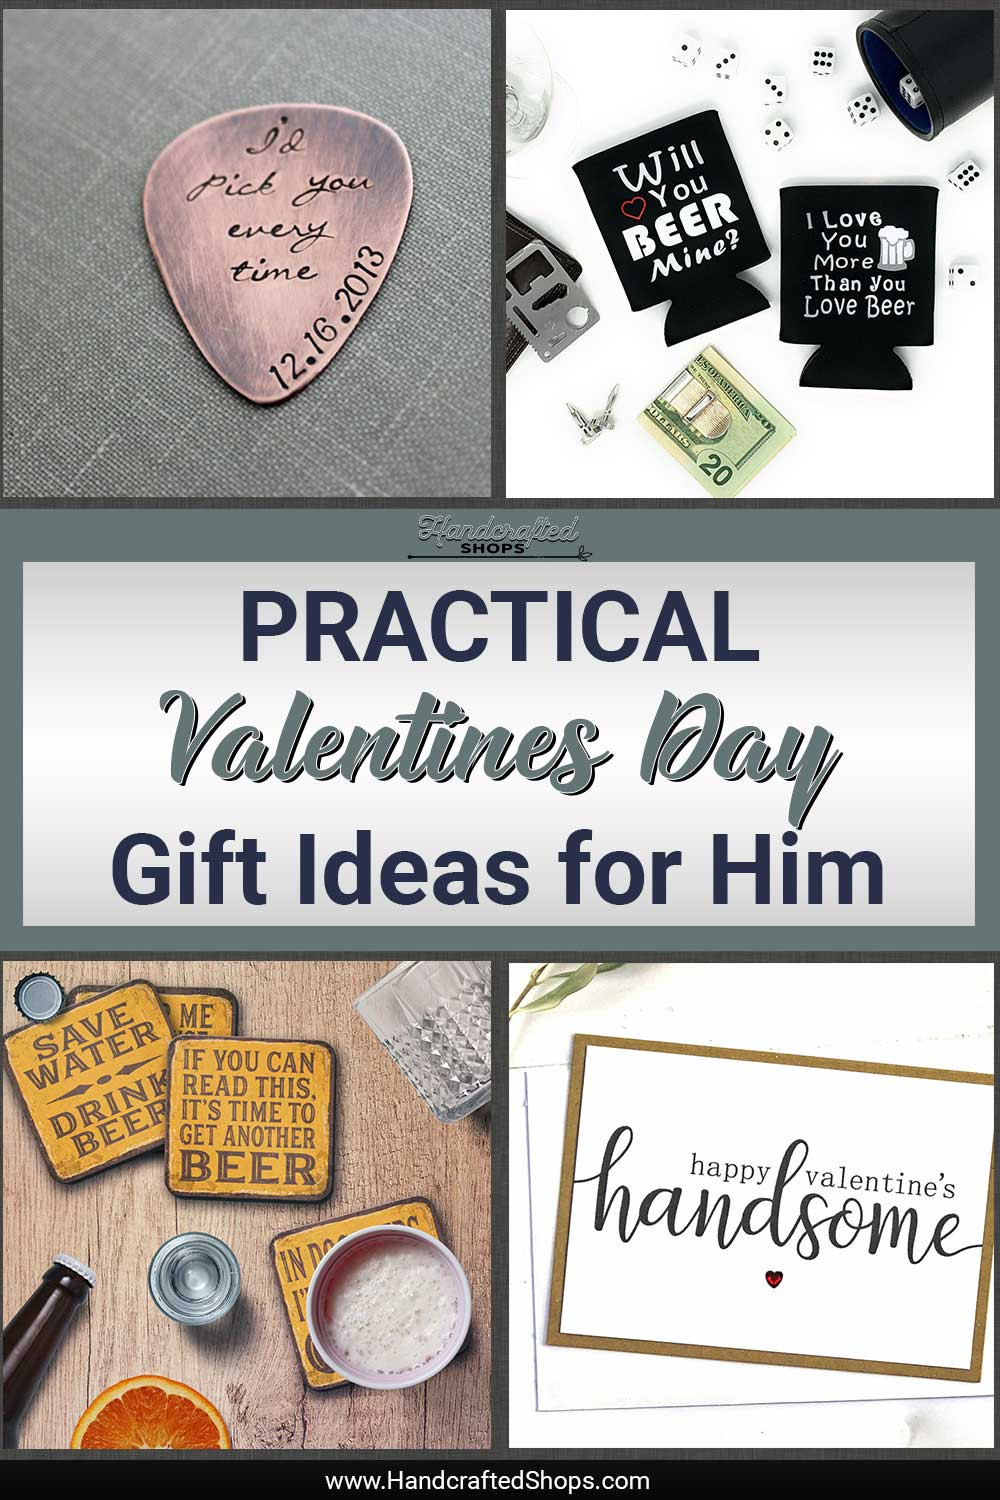 Valentines Day Gift Ideas 2020
 Practical Valentines Day 2020 Gift Ideas for Him that are